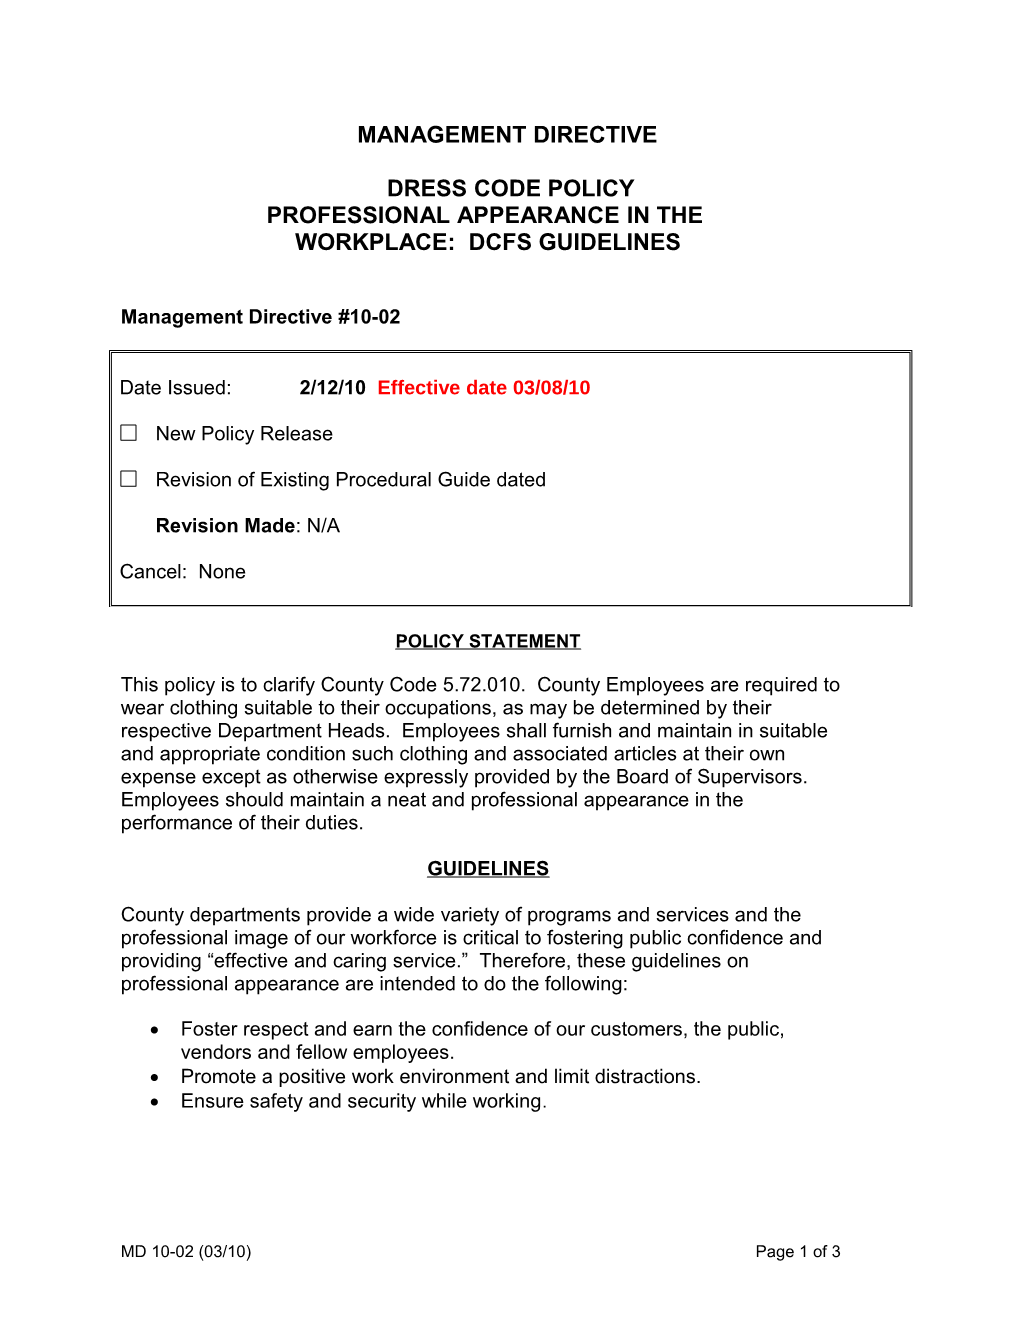 Management Directive 10-02, Dress Code Policy Professional Appearance in the Work Place